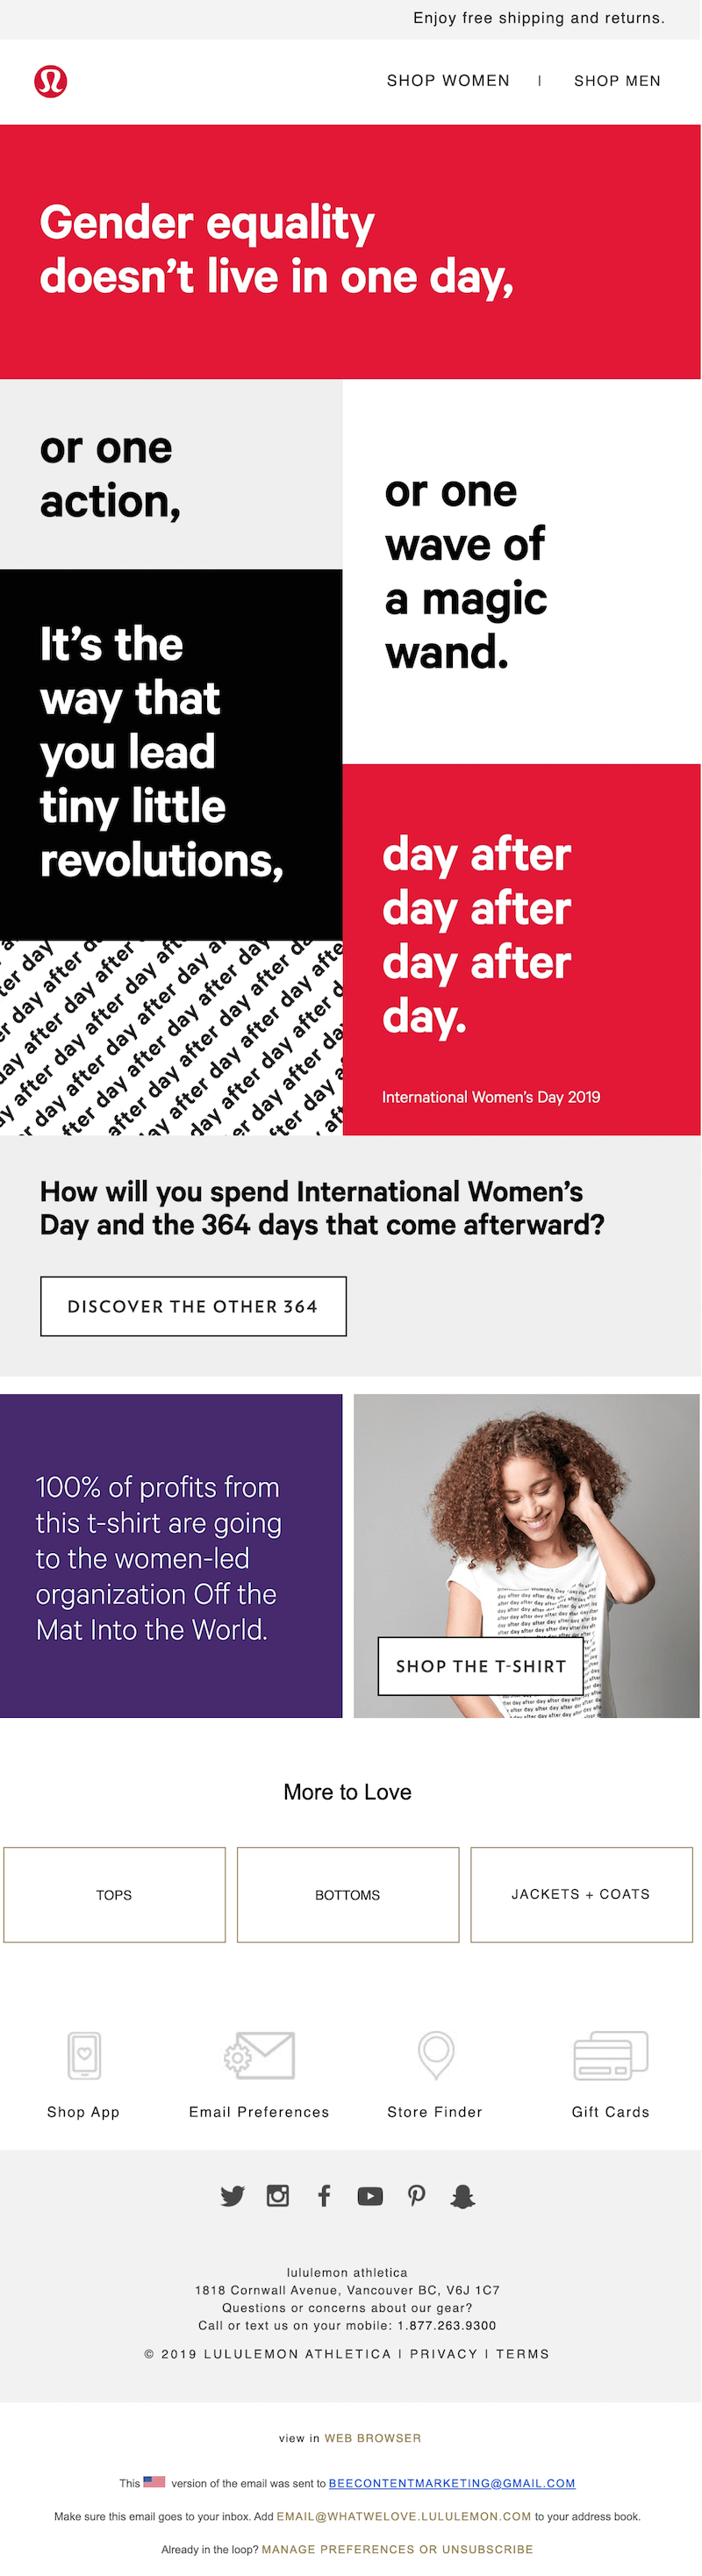 International Women’s Day Email by Lululemon